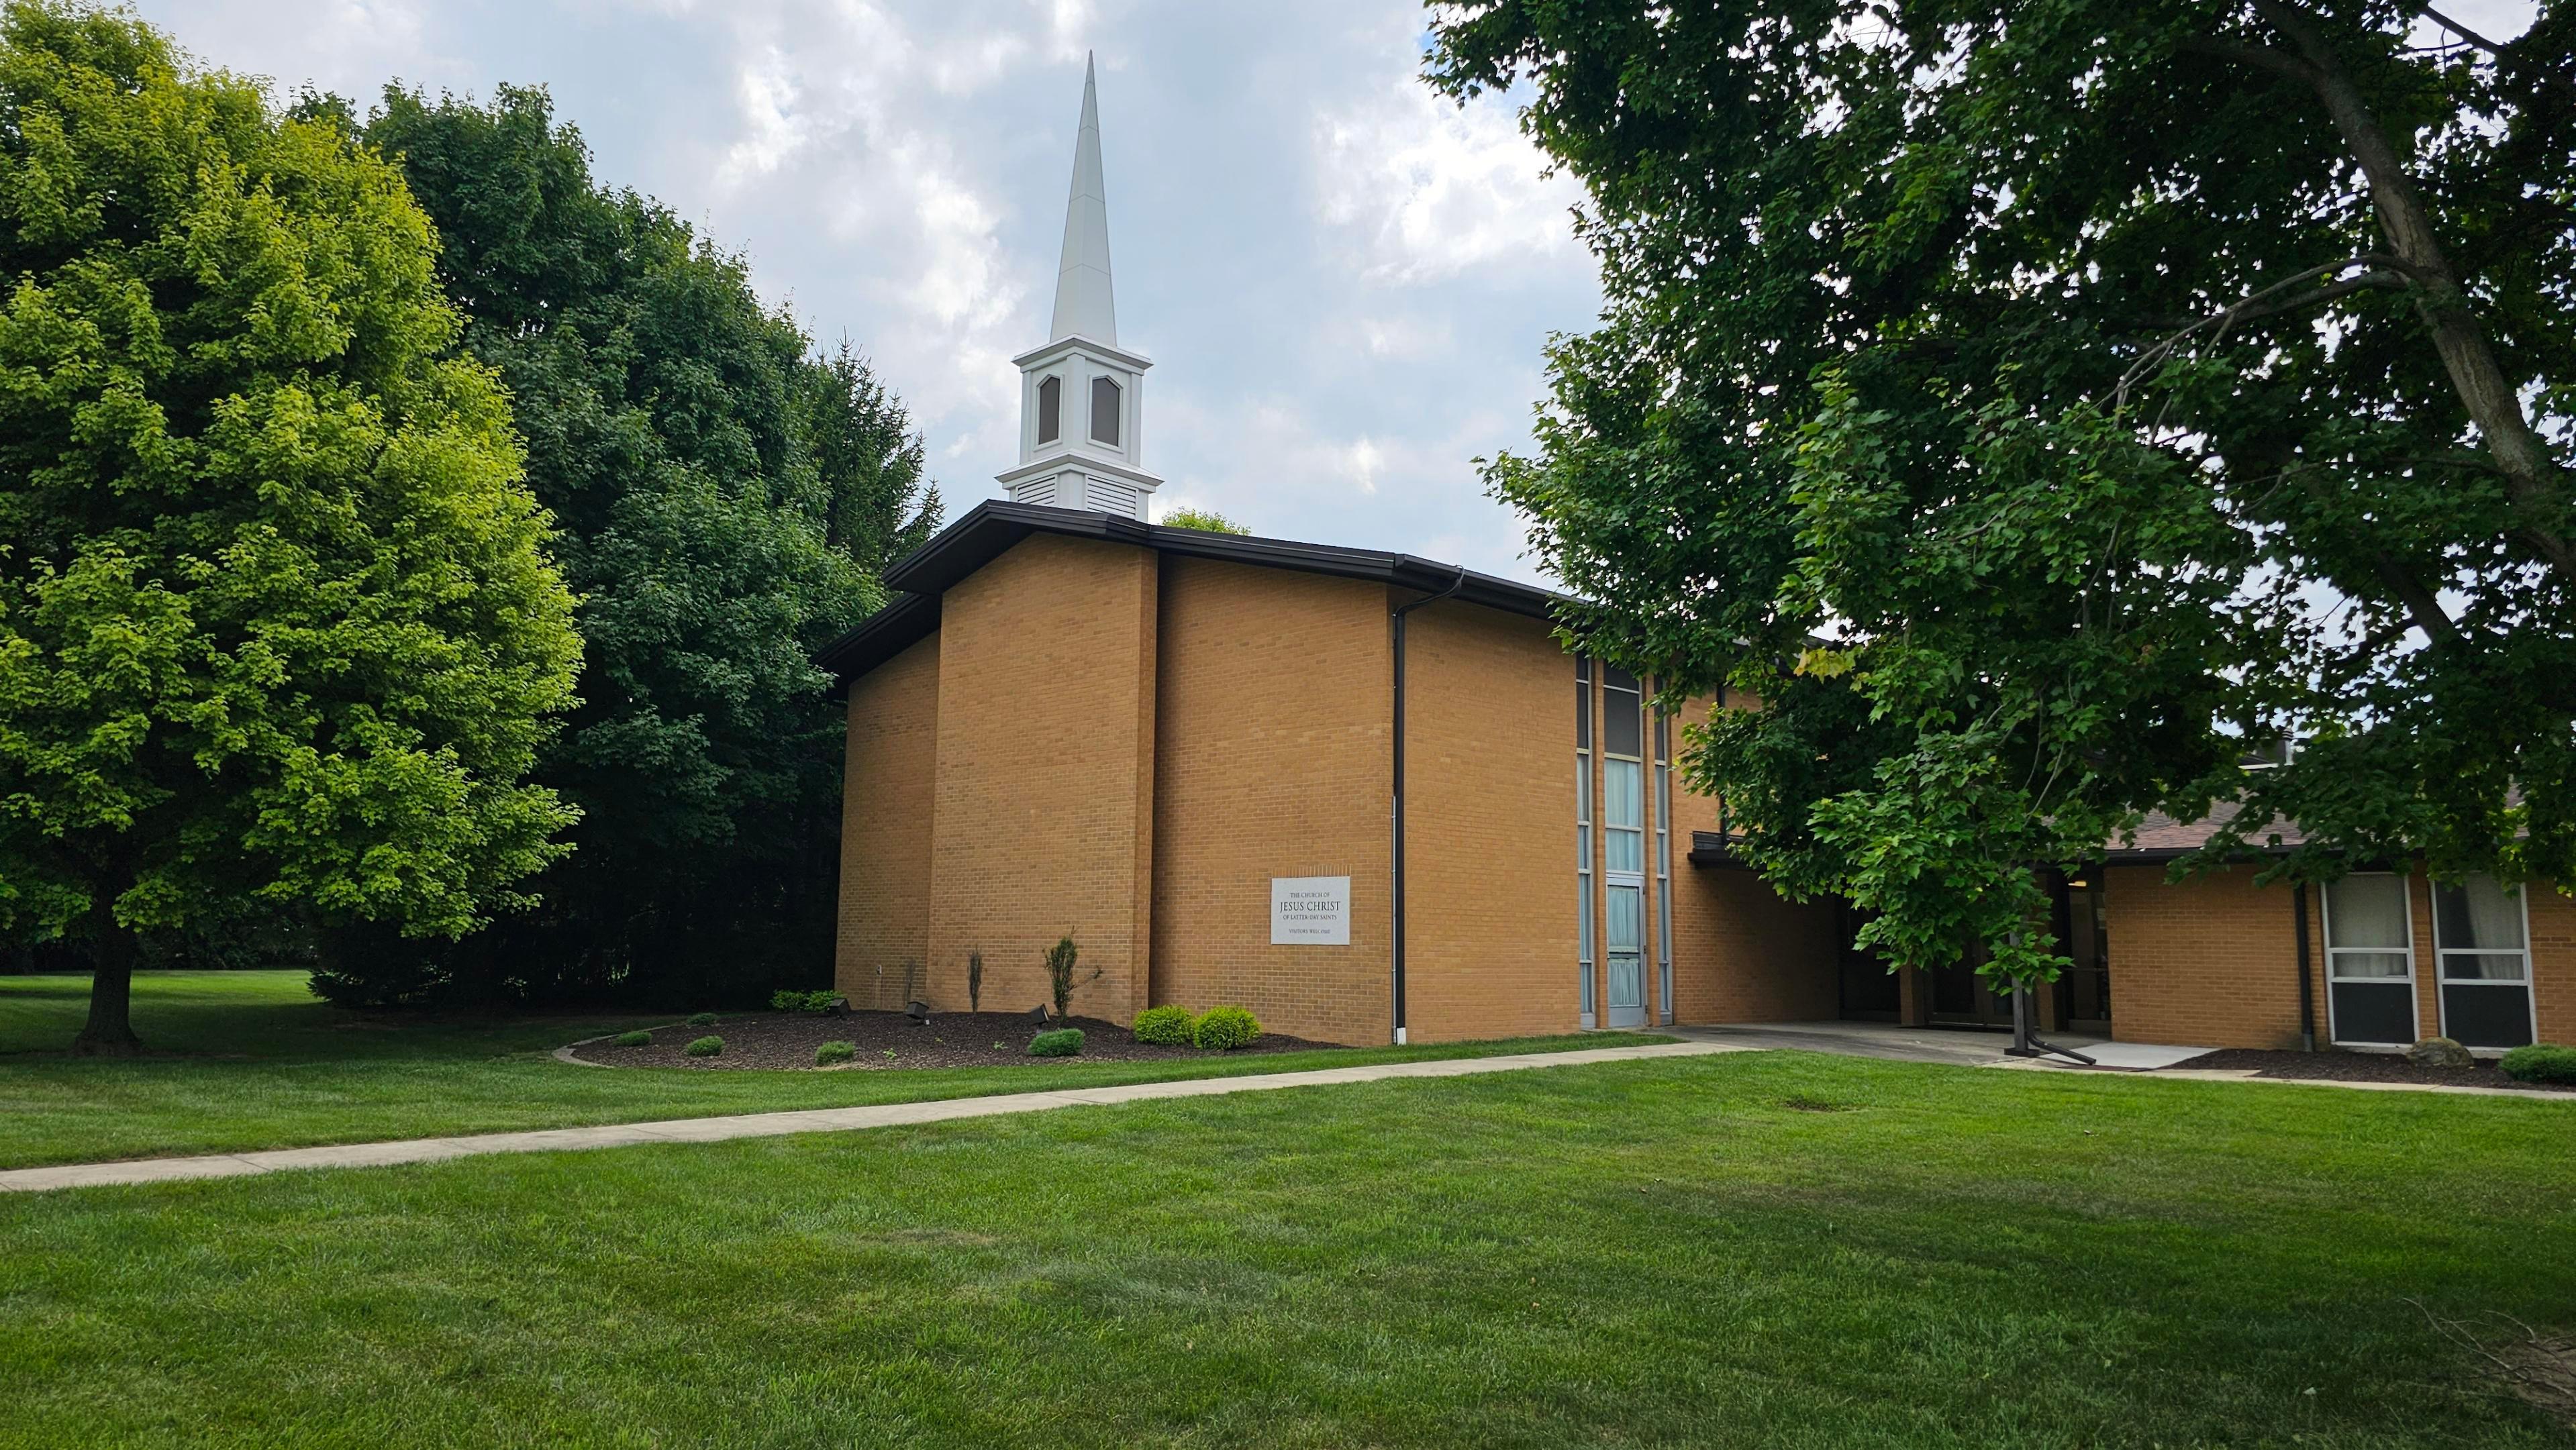 Exterior of the Bowling Green meetinghouse of The Church of Jesus Christ of Latter-day Saints, located at 1033 Conneaut Avenue, Bowling Green, OH 43402.